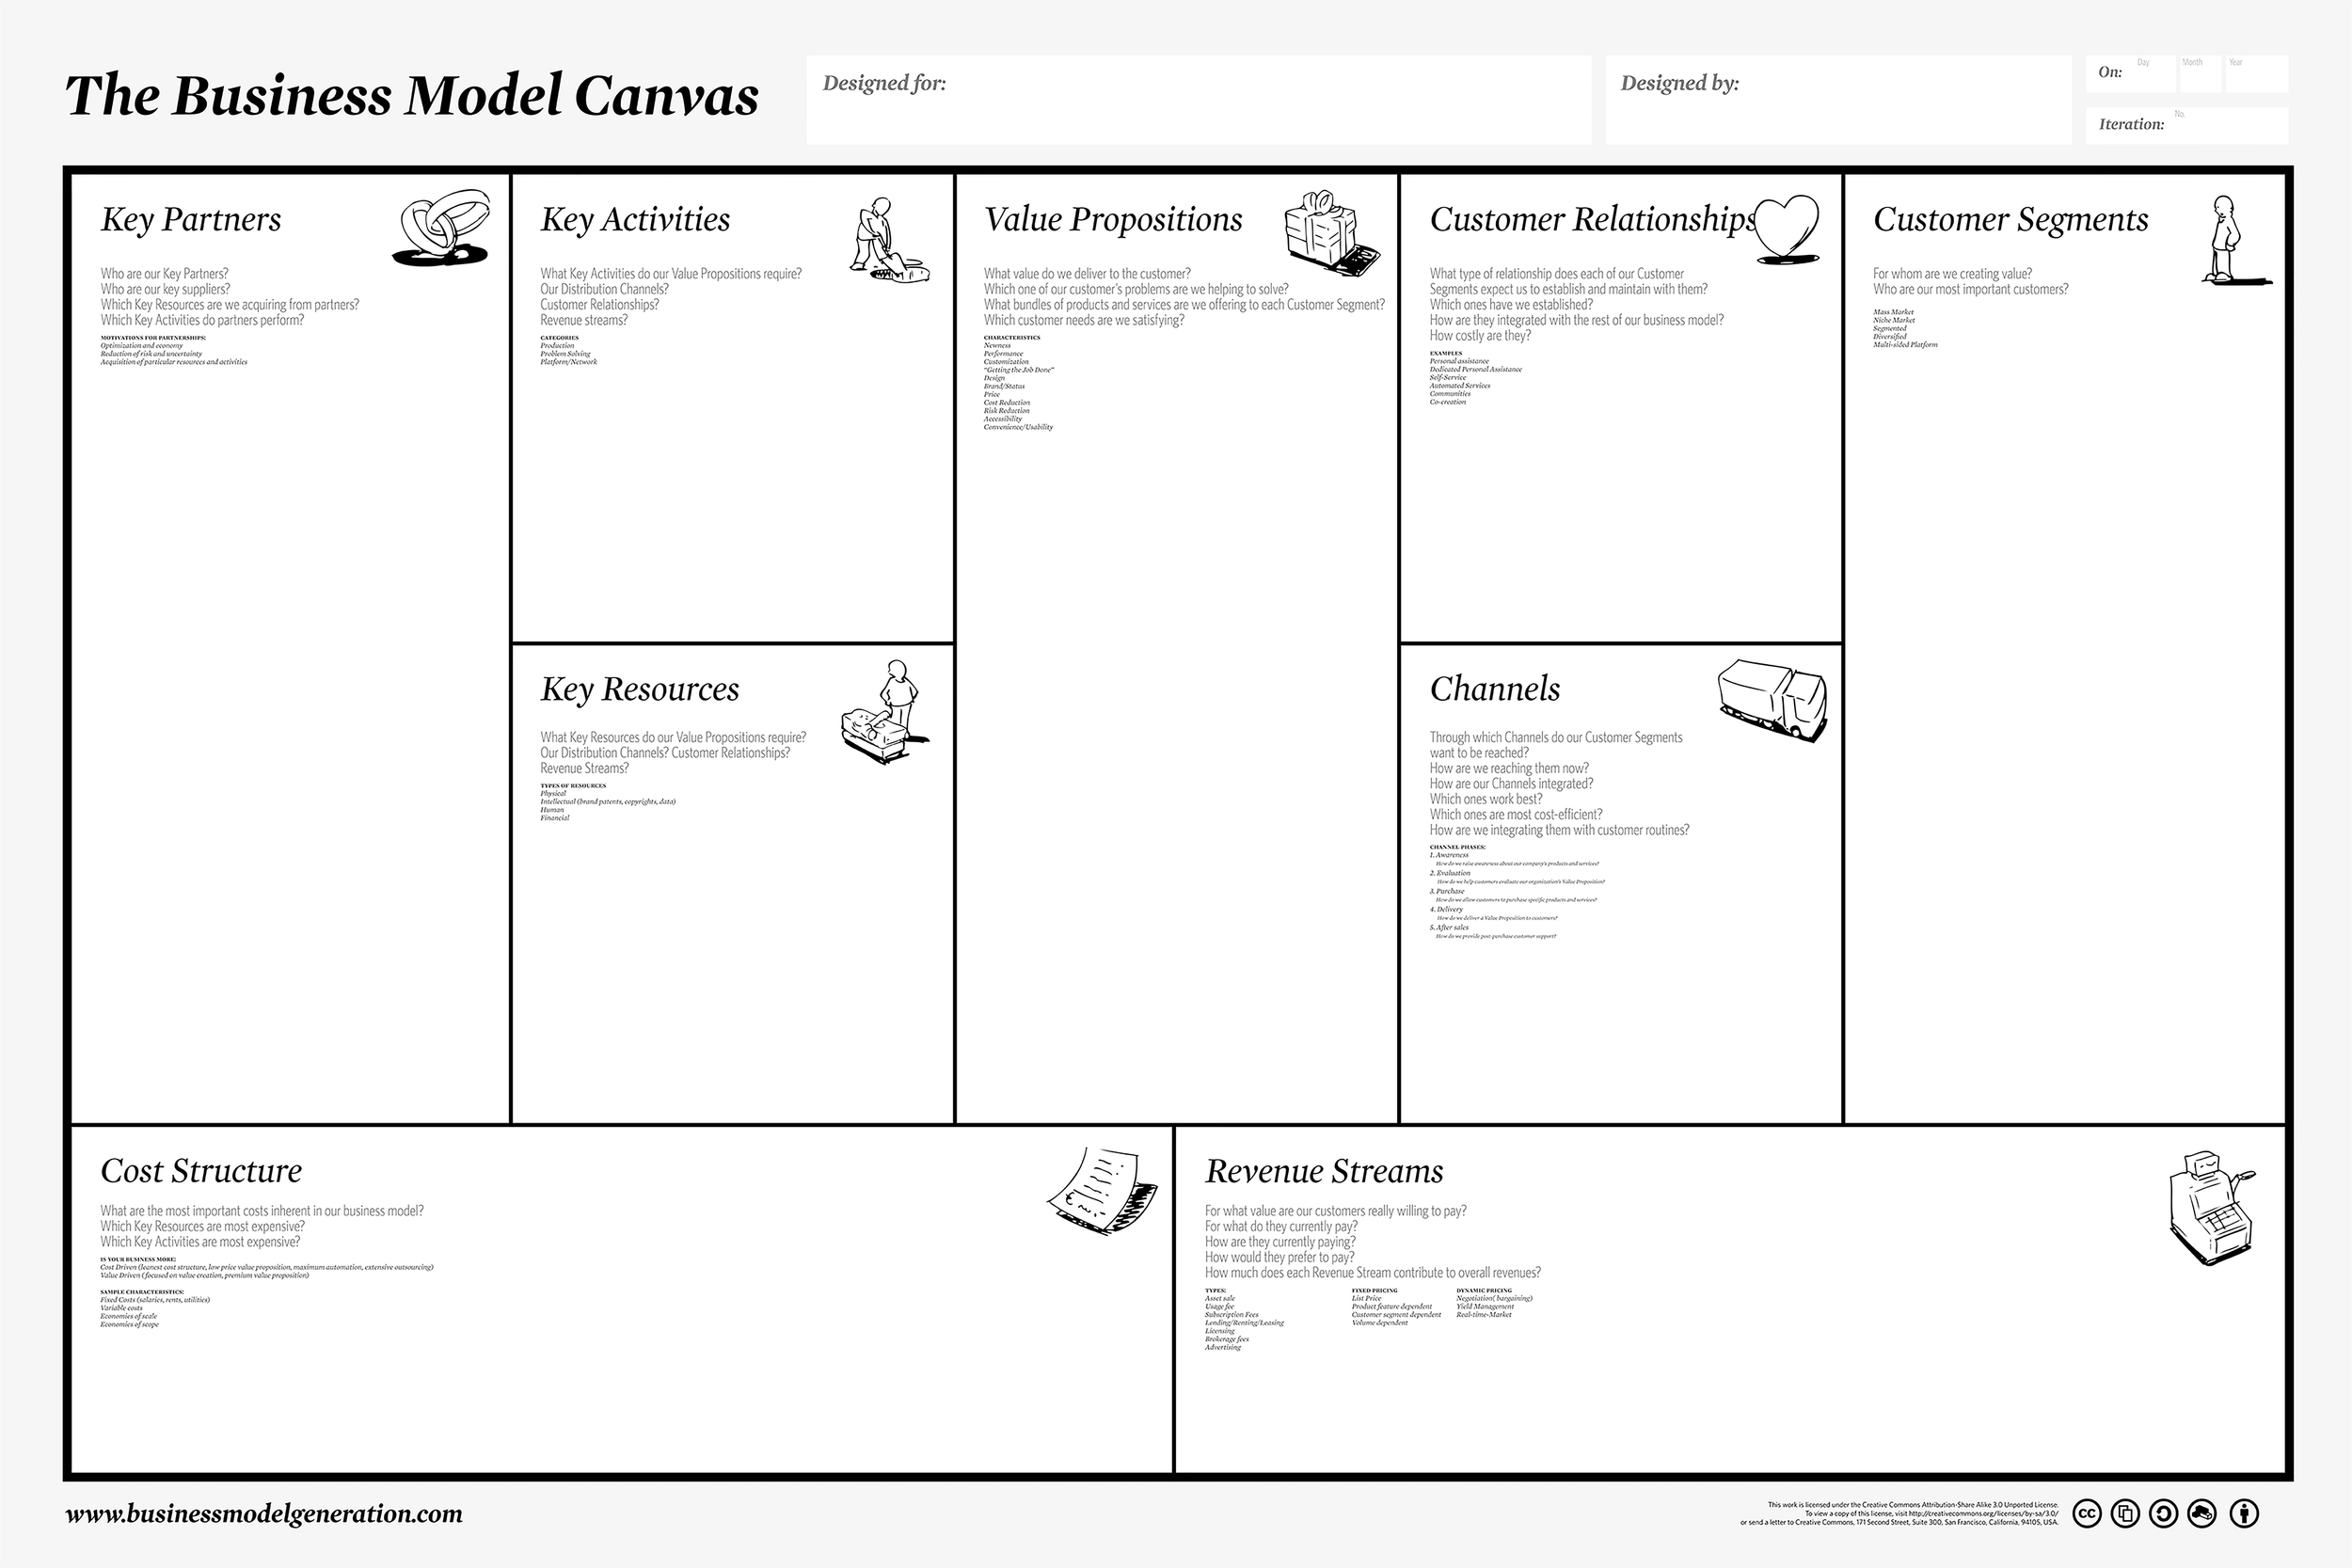 How To Learn IMPROVING THE BUSINESS MODEL CANVAS